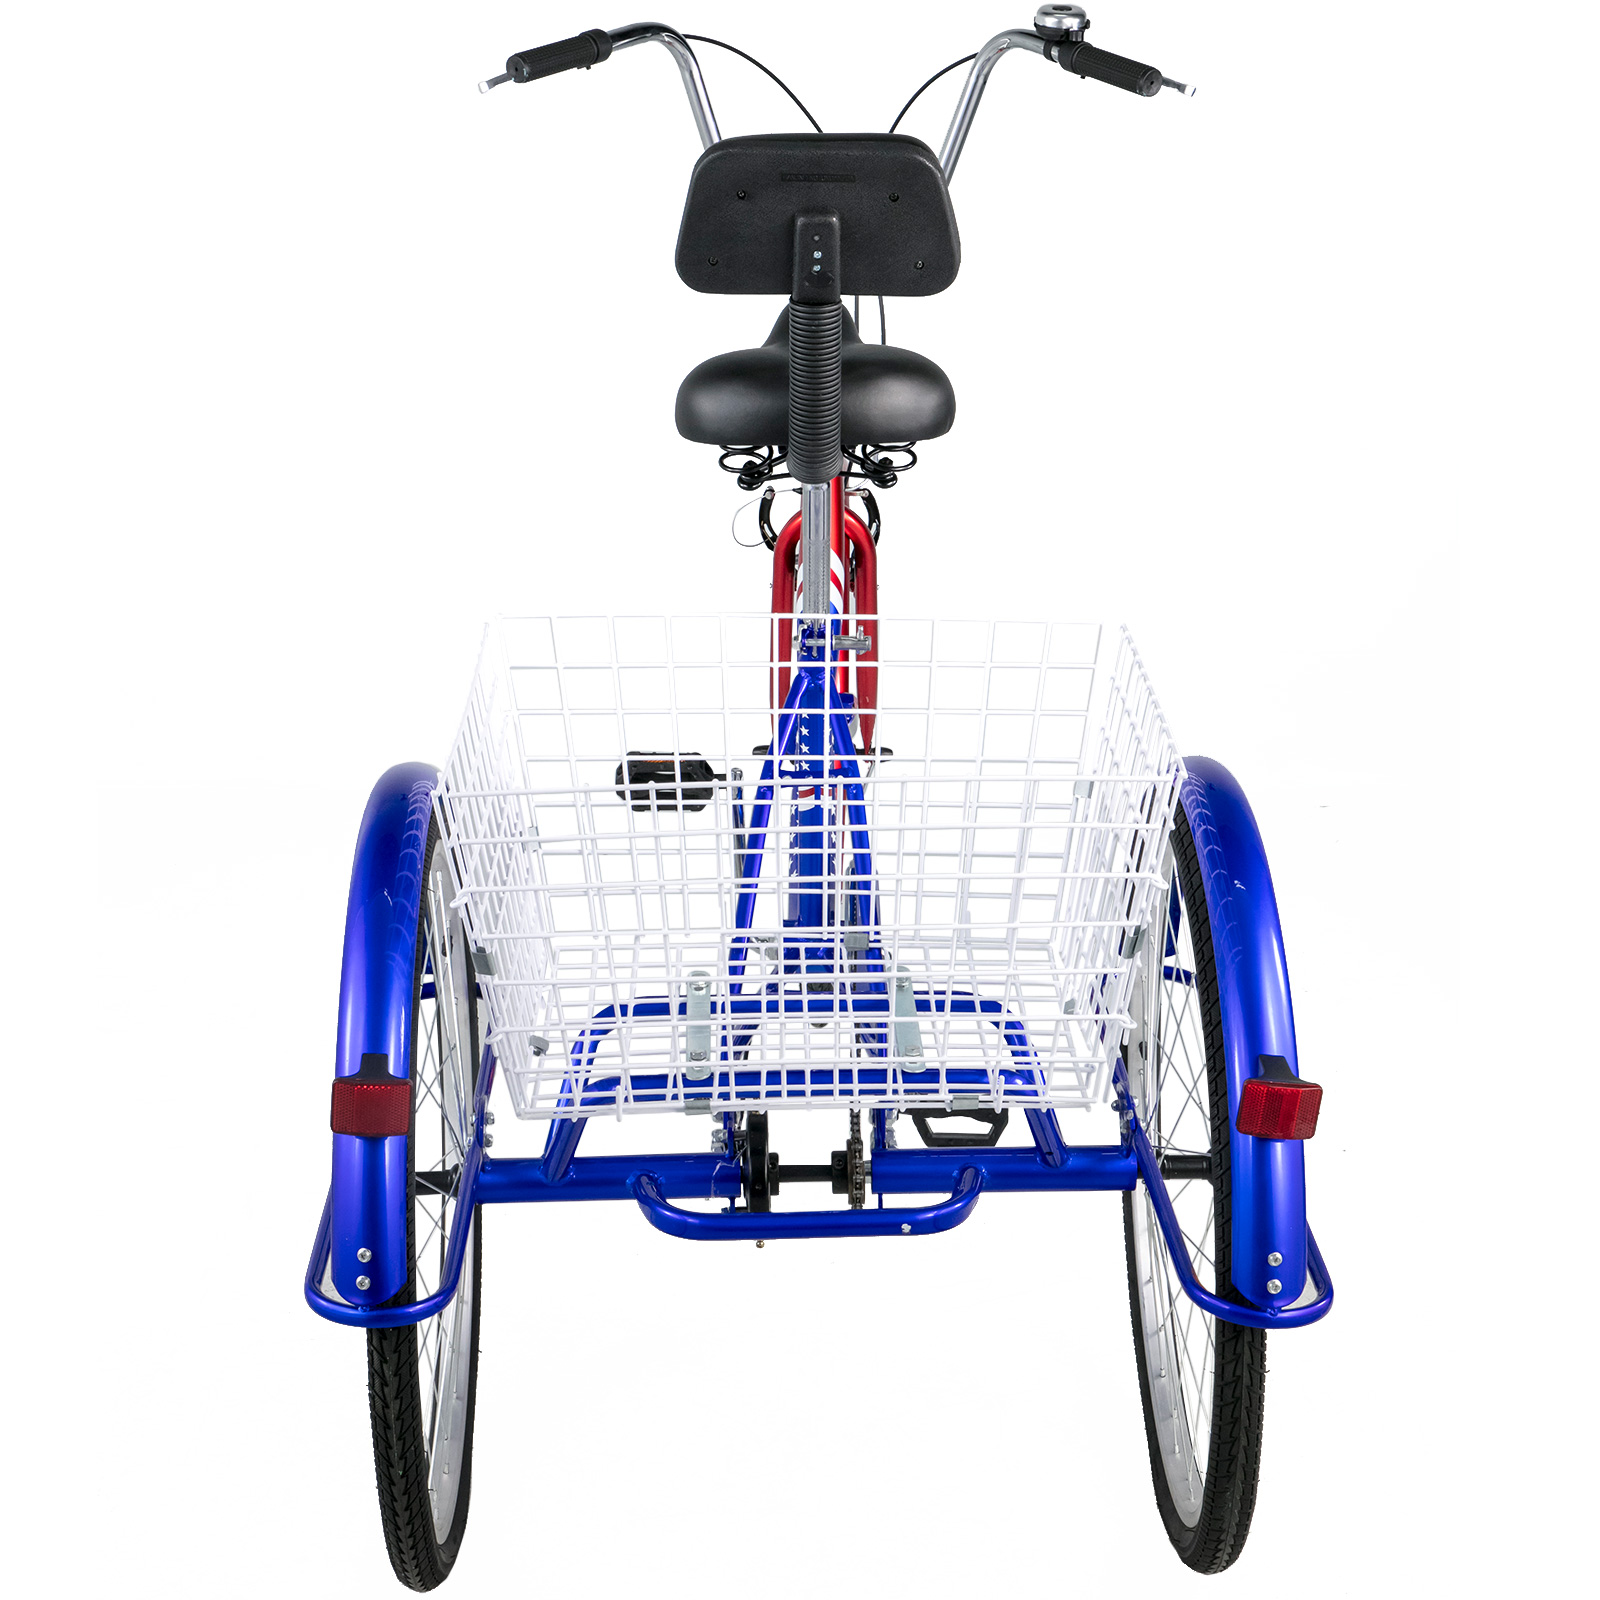 7 speed adult tricycle